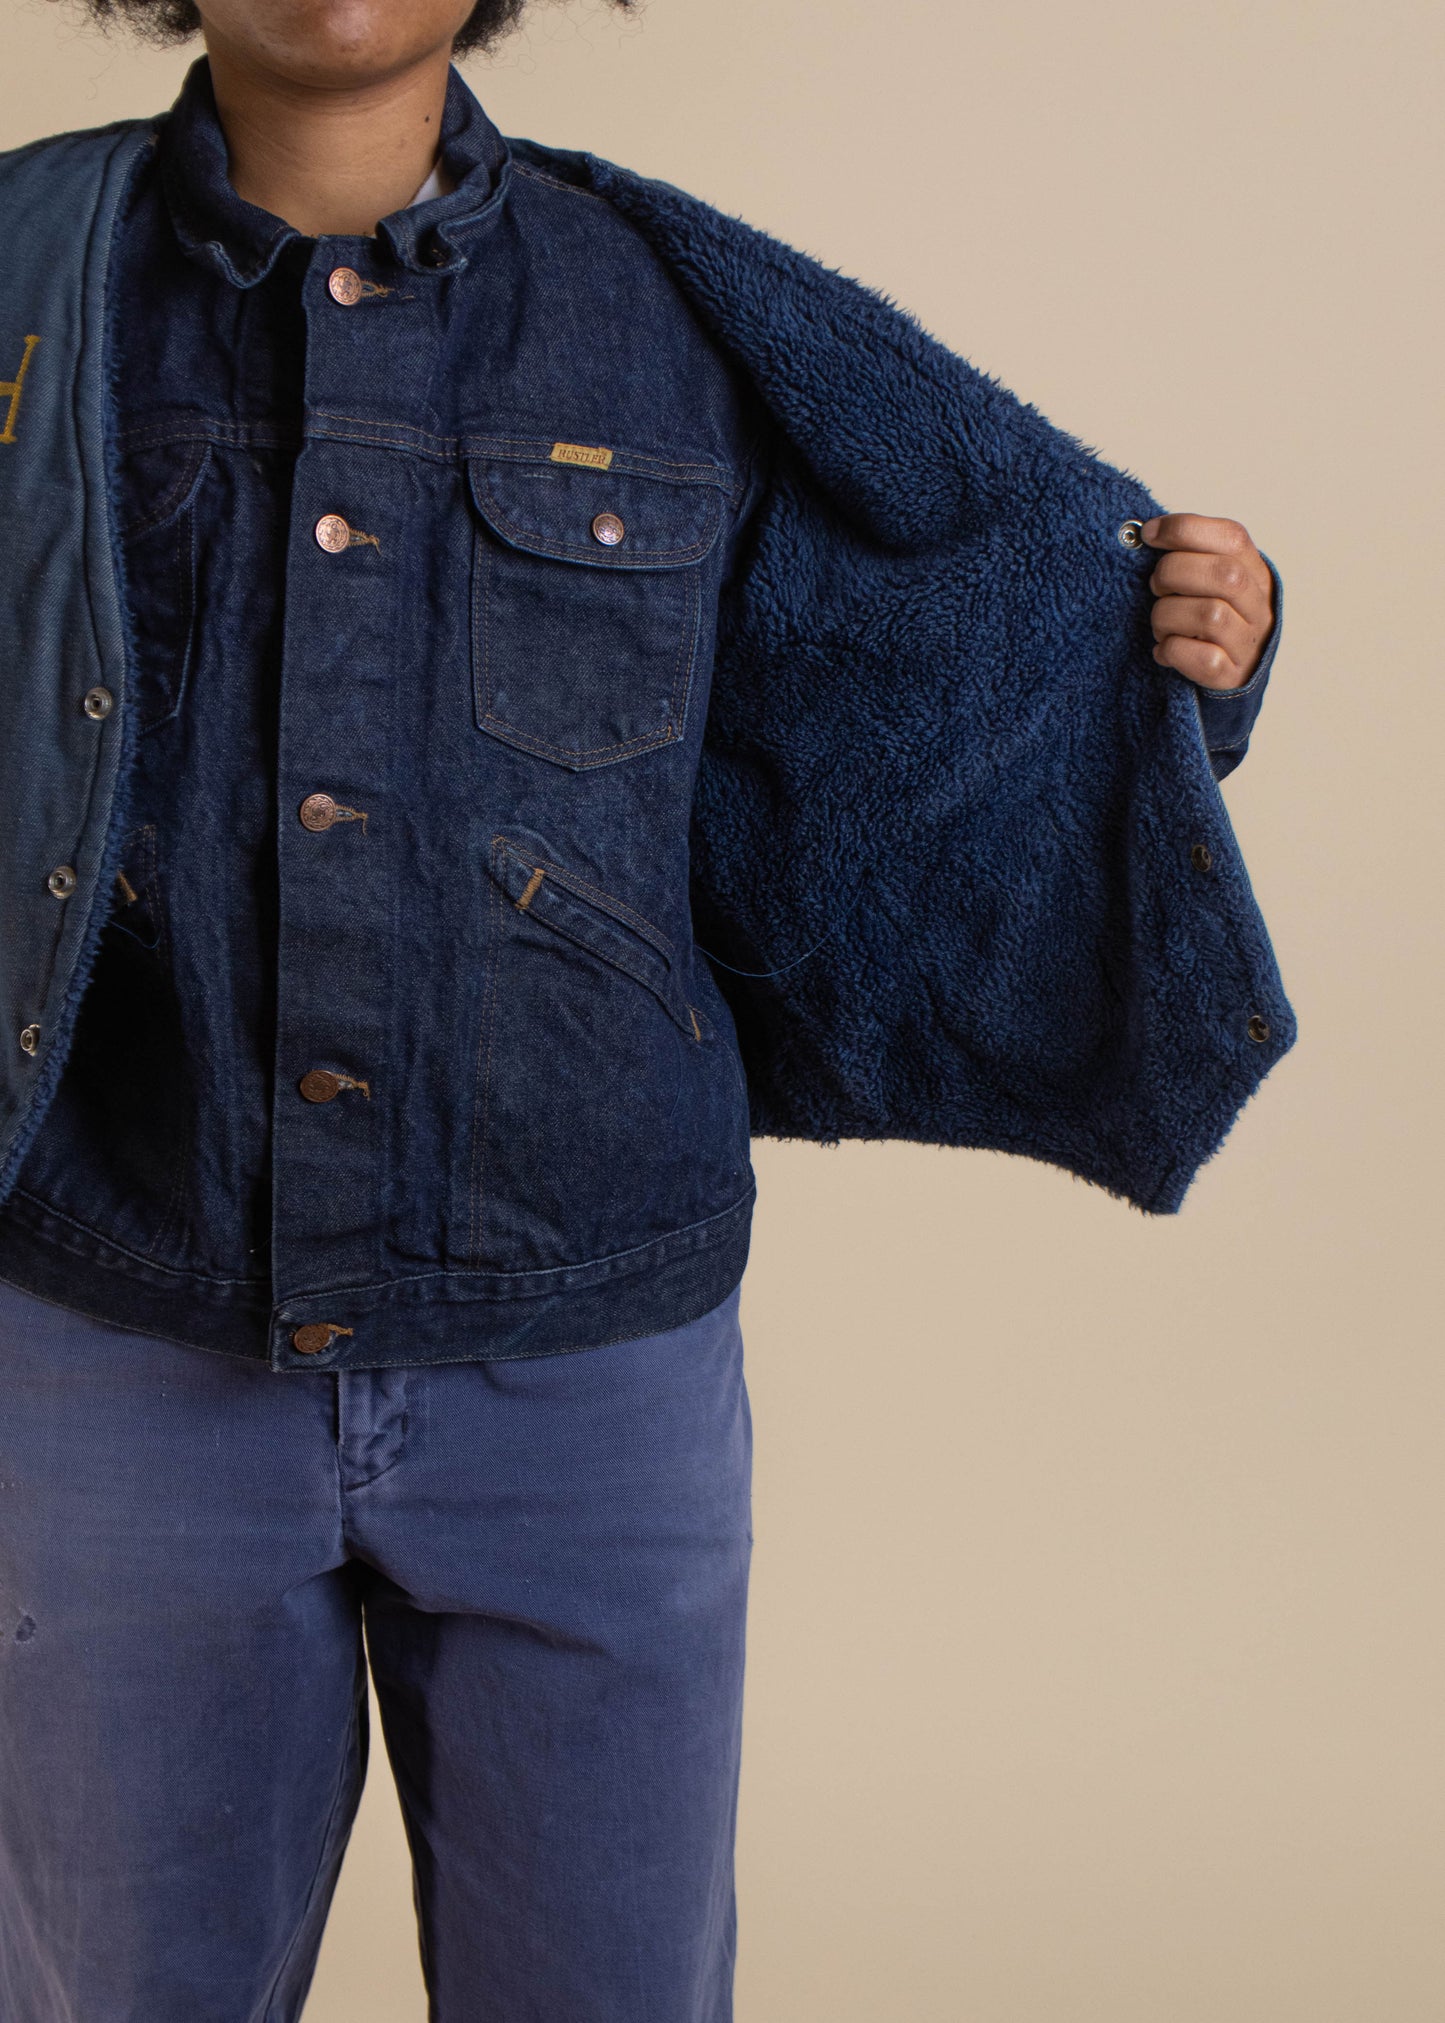 1970s Hand Painted Sherpa Lined Denim Vest Size S/M